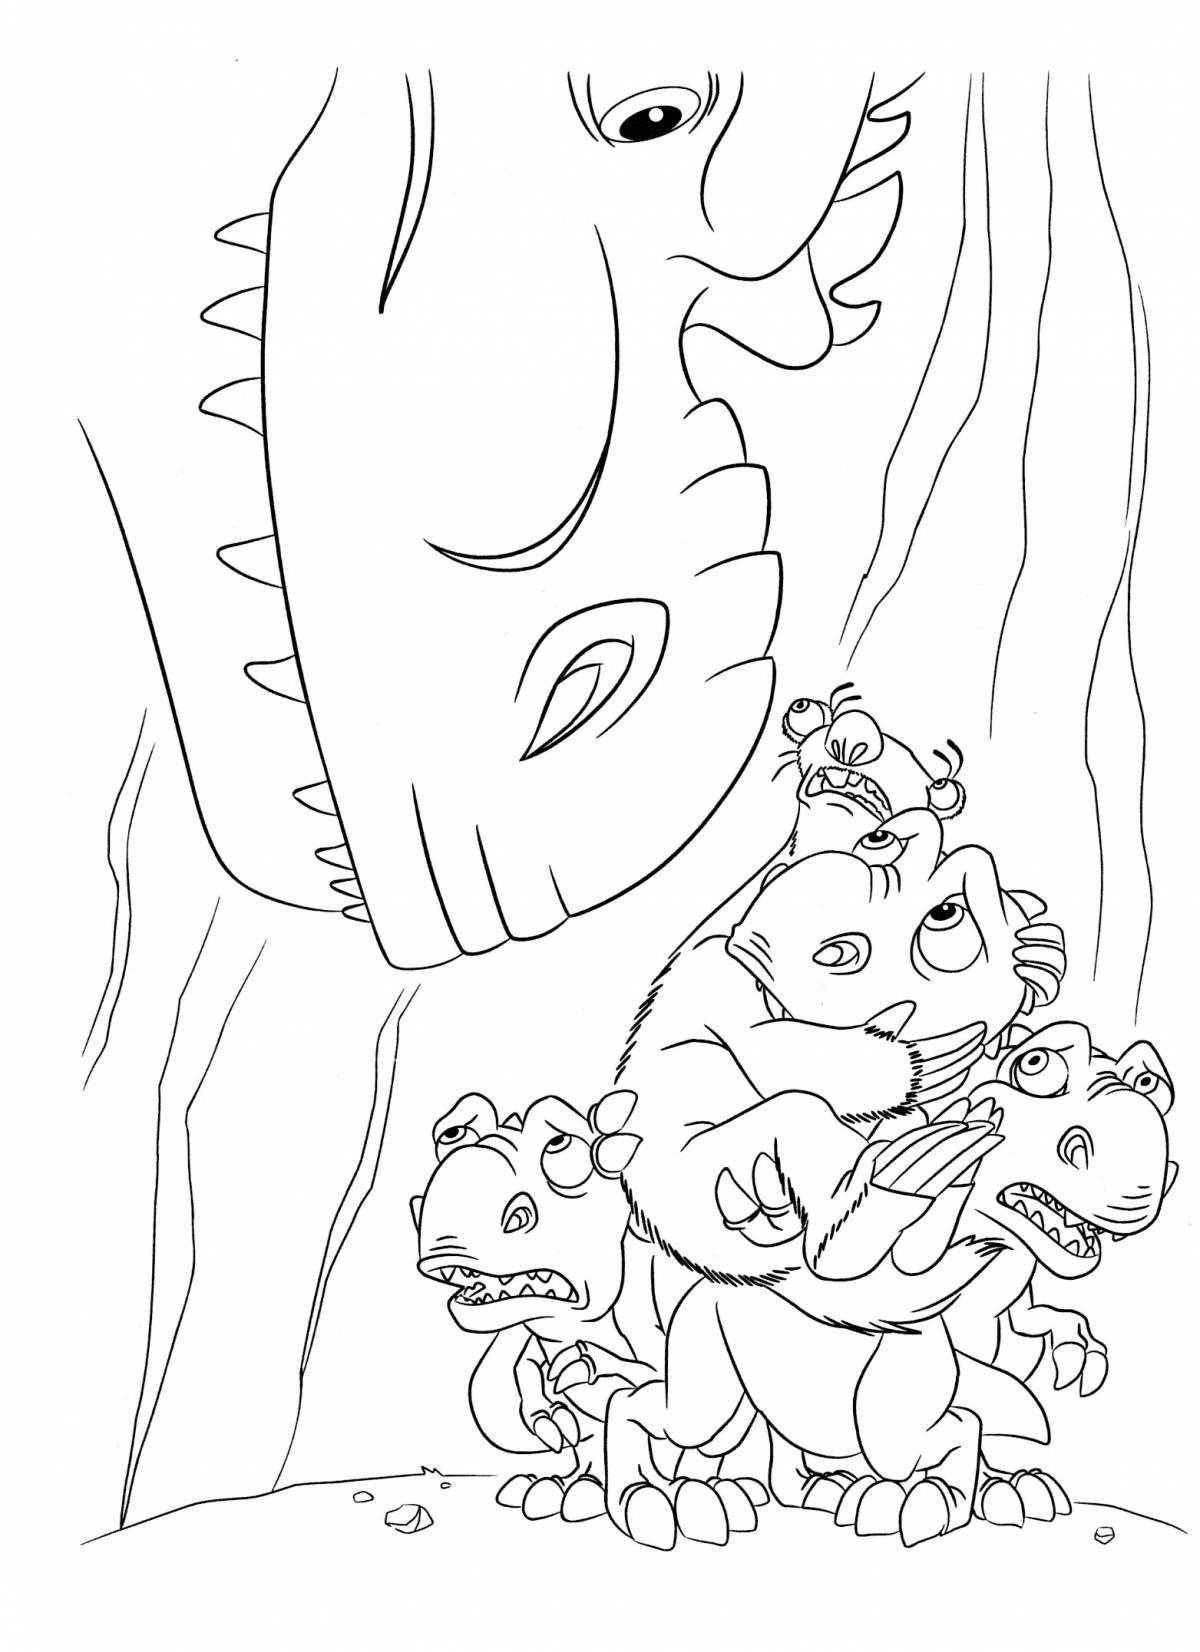 Radiant ice age 3 coloring page